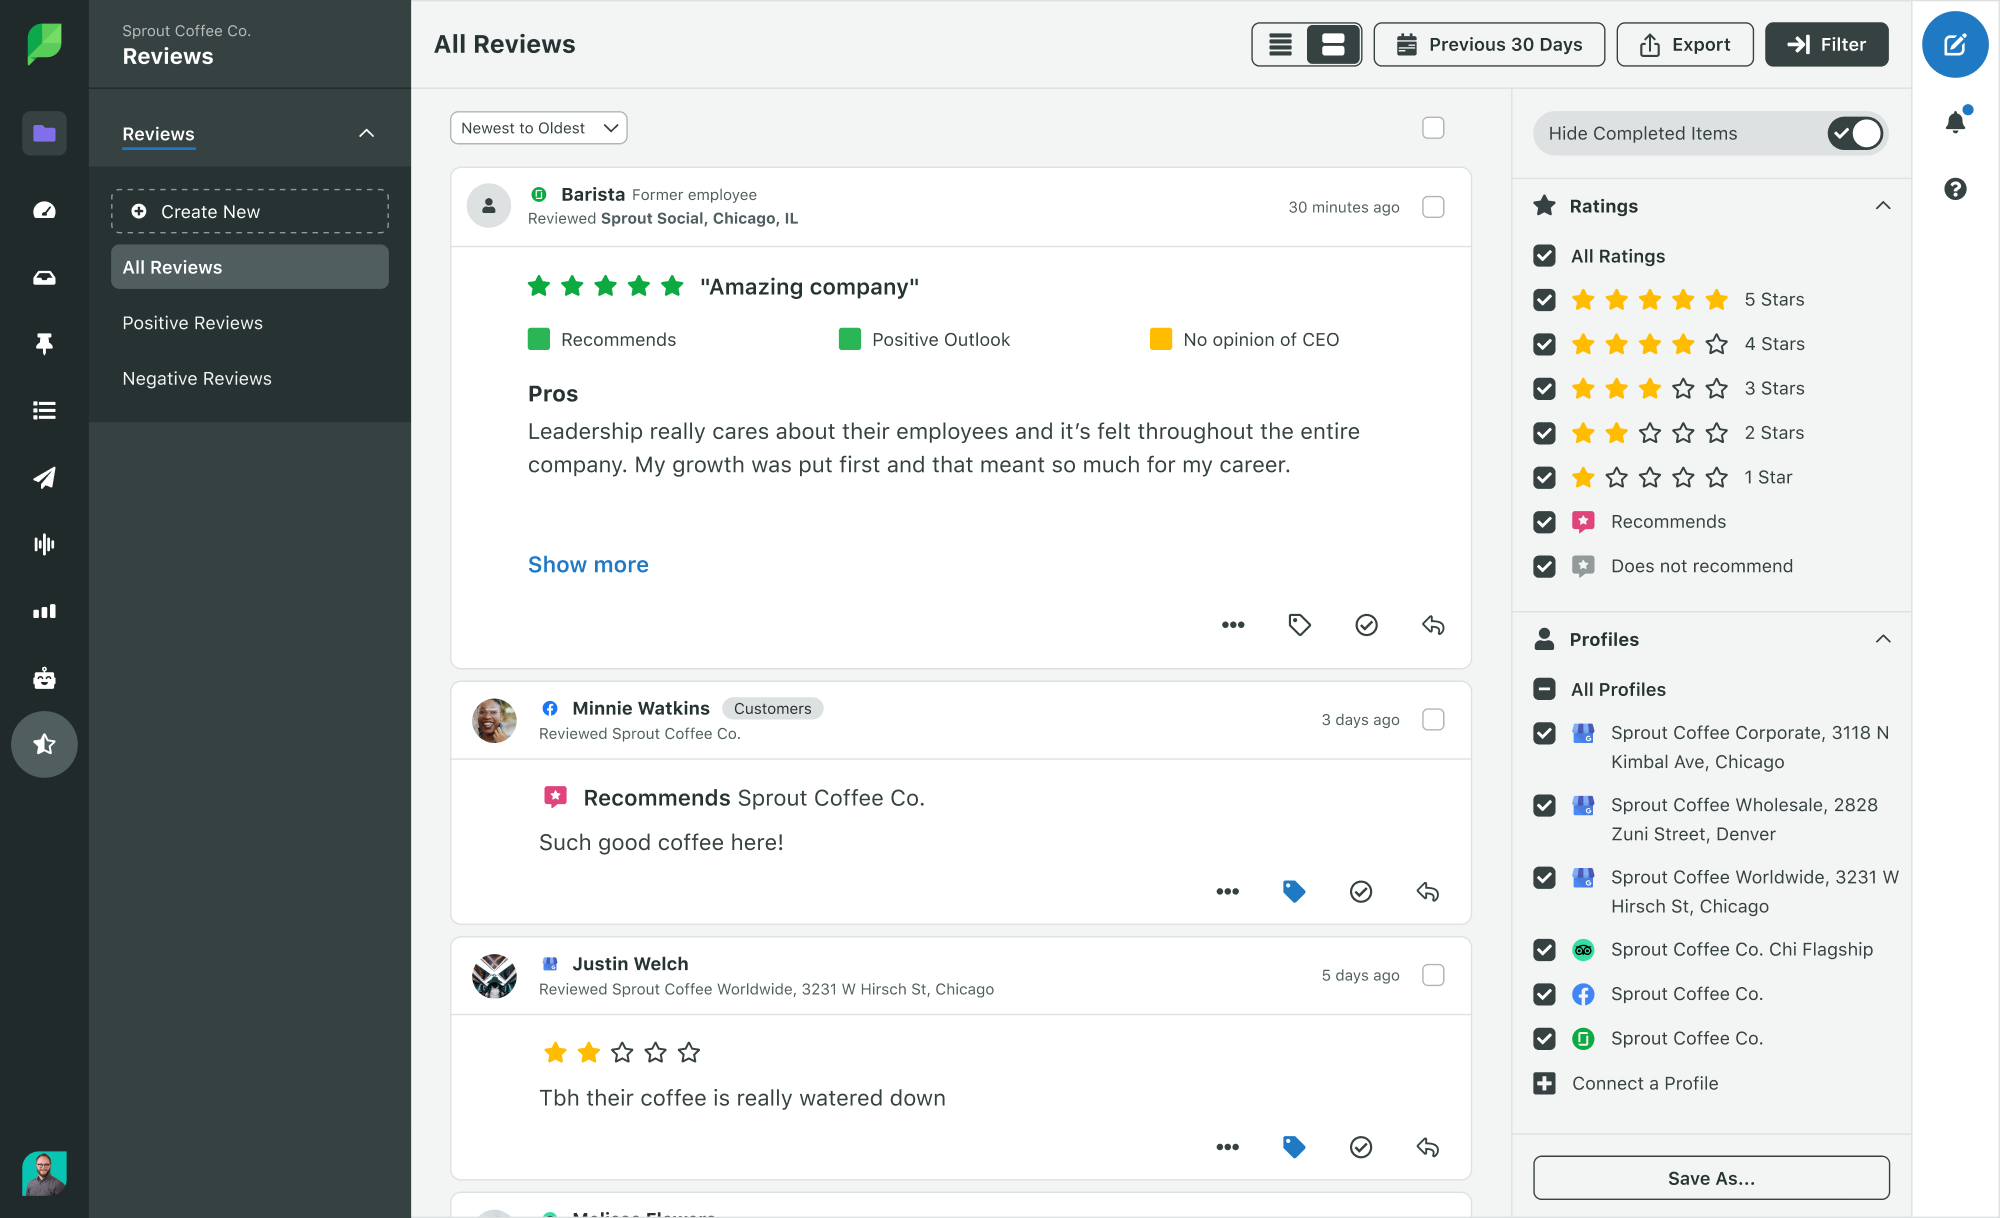 Sprout Social's review management tool pulls in reviews across multiple sites into one inbox.